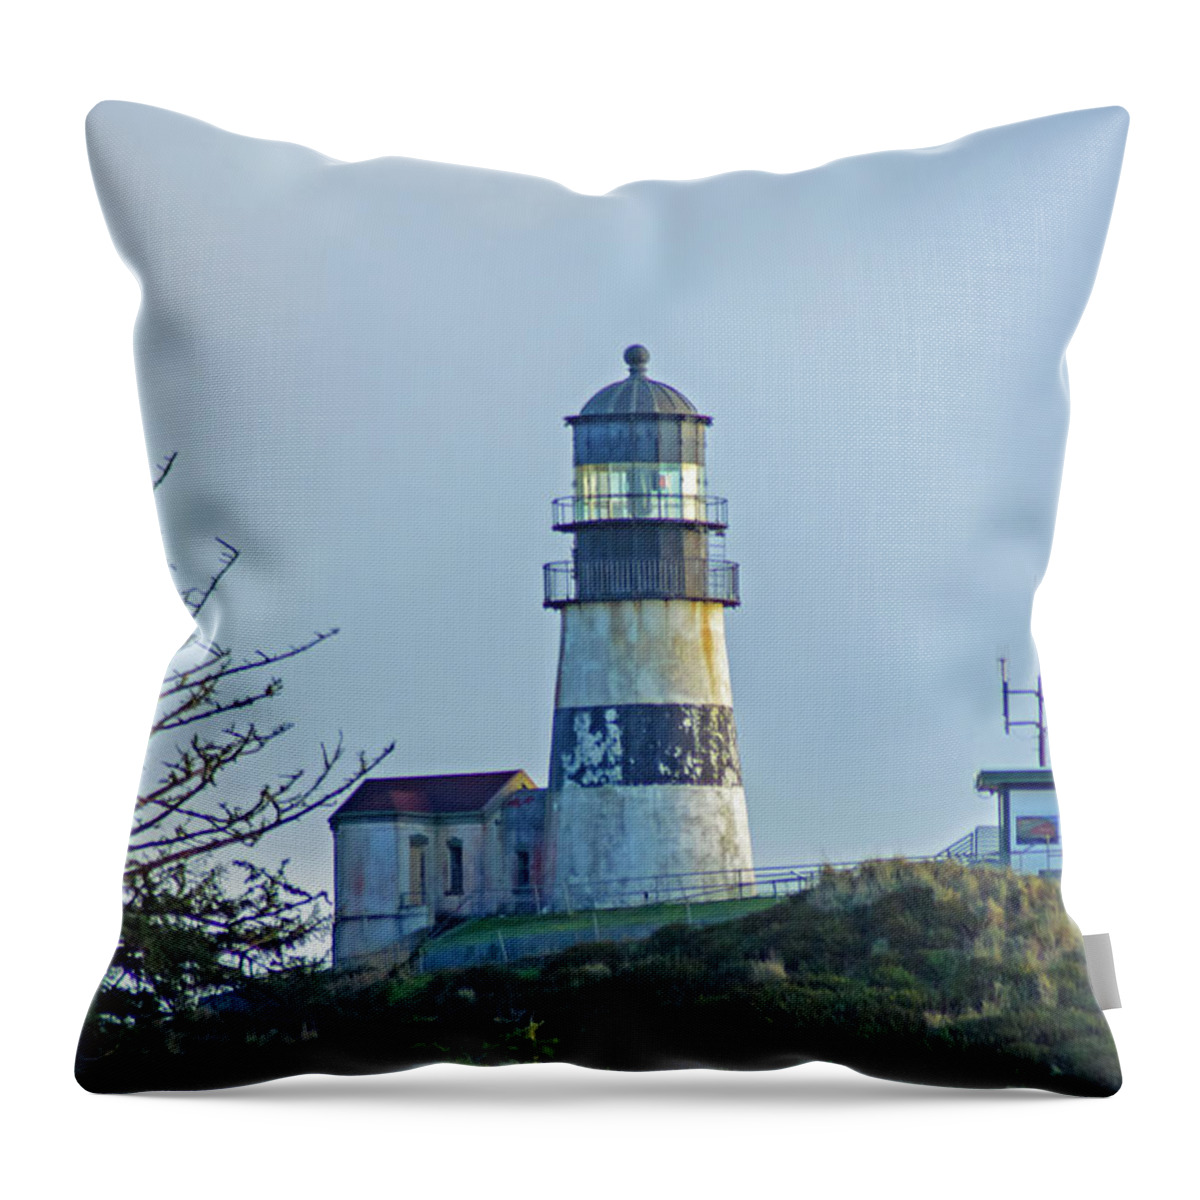 Lighthouse Throw Pillow featuring the photograph Cape Disappointment Lighthouse by Tikvah's Hope